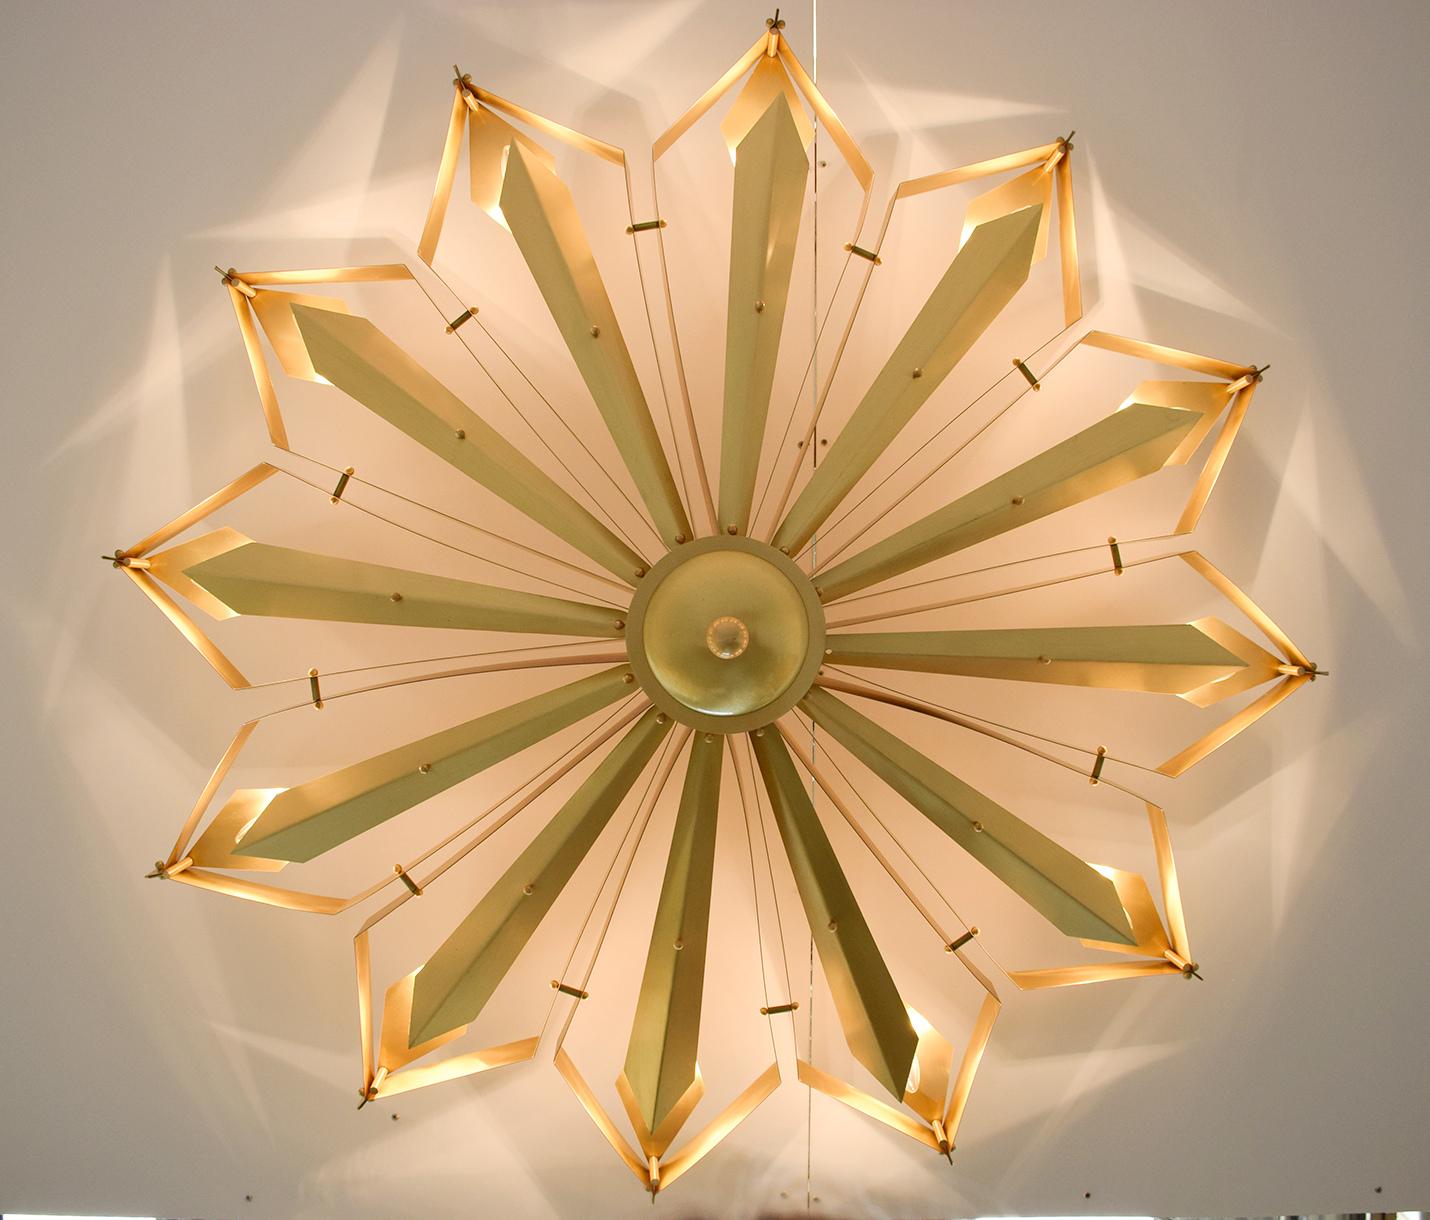 Elegant Italian flush mount with satin brass frame handcrafted to resemble a convex dahlia flower, designed by Fabio Bergomi for Fabio Ltd / Made in Italy
12 lights / E12 or E14 type / max 40W each
Measures: Diameter 51 inches / Height 16